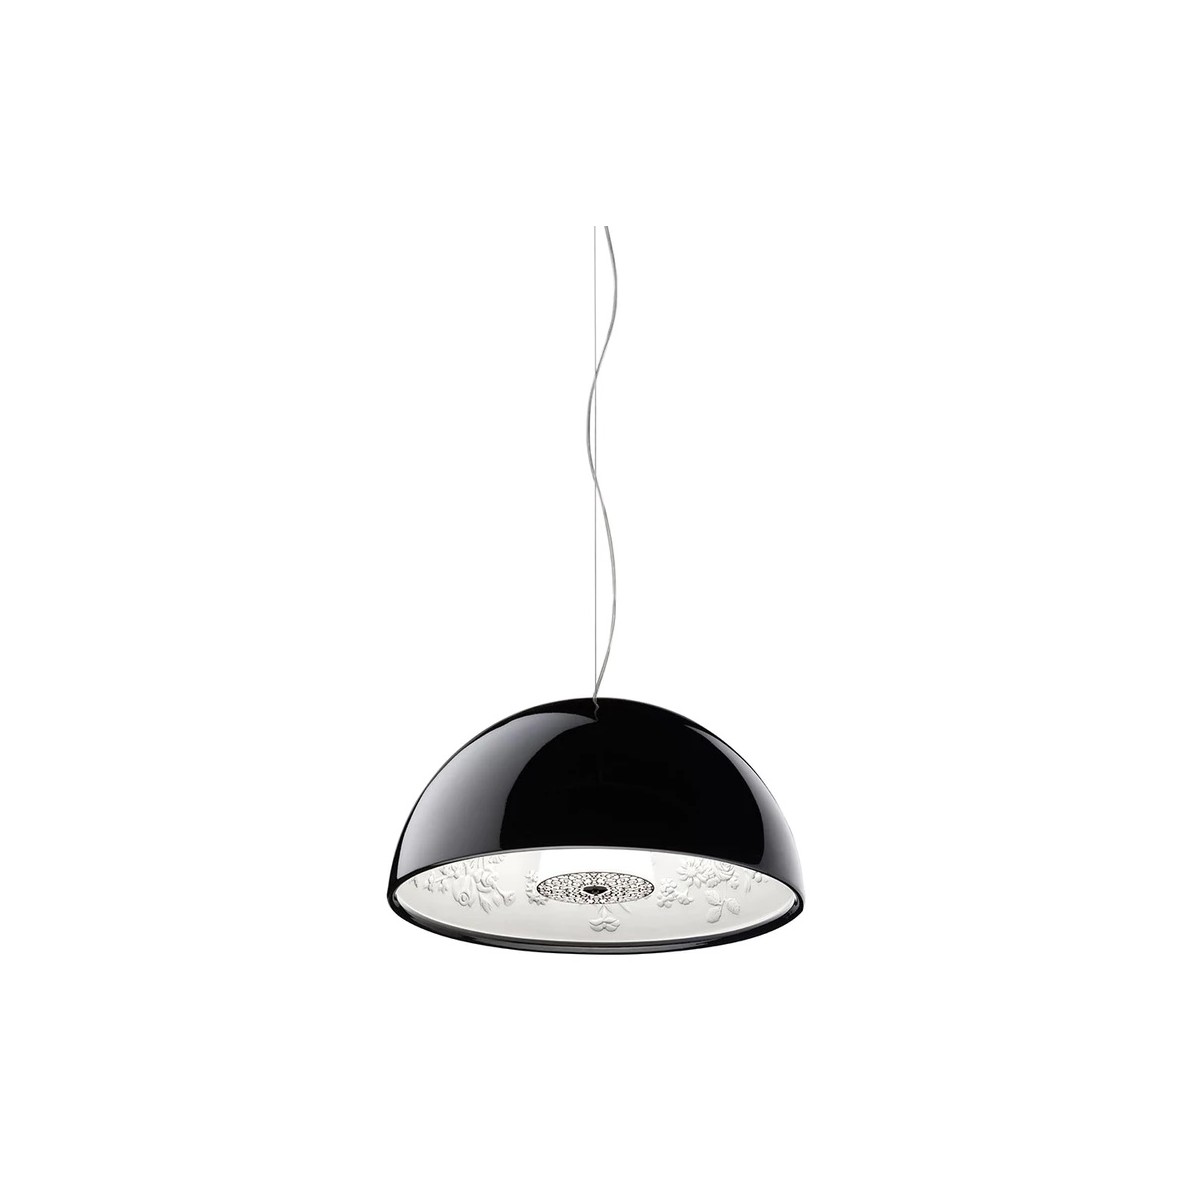 SOLD OUT Ø40 x H19.7cm - black - Skygarden small pendant